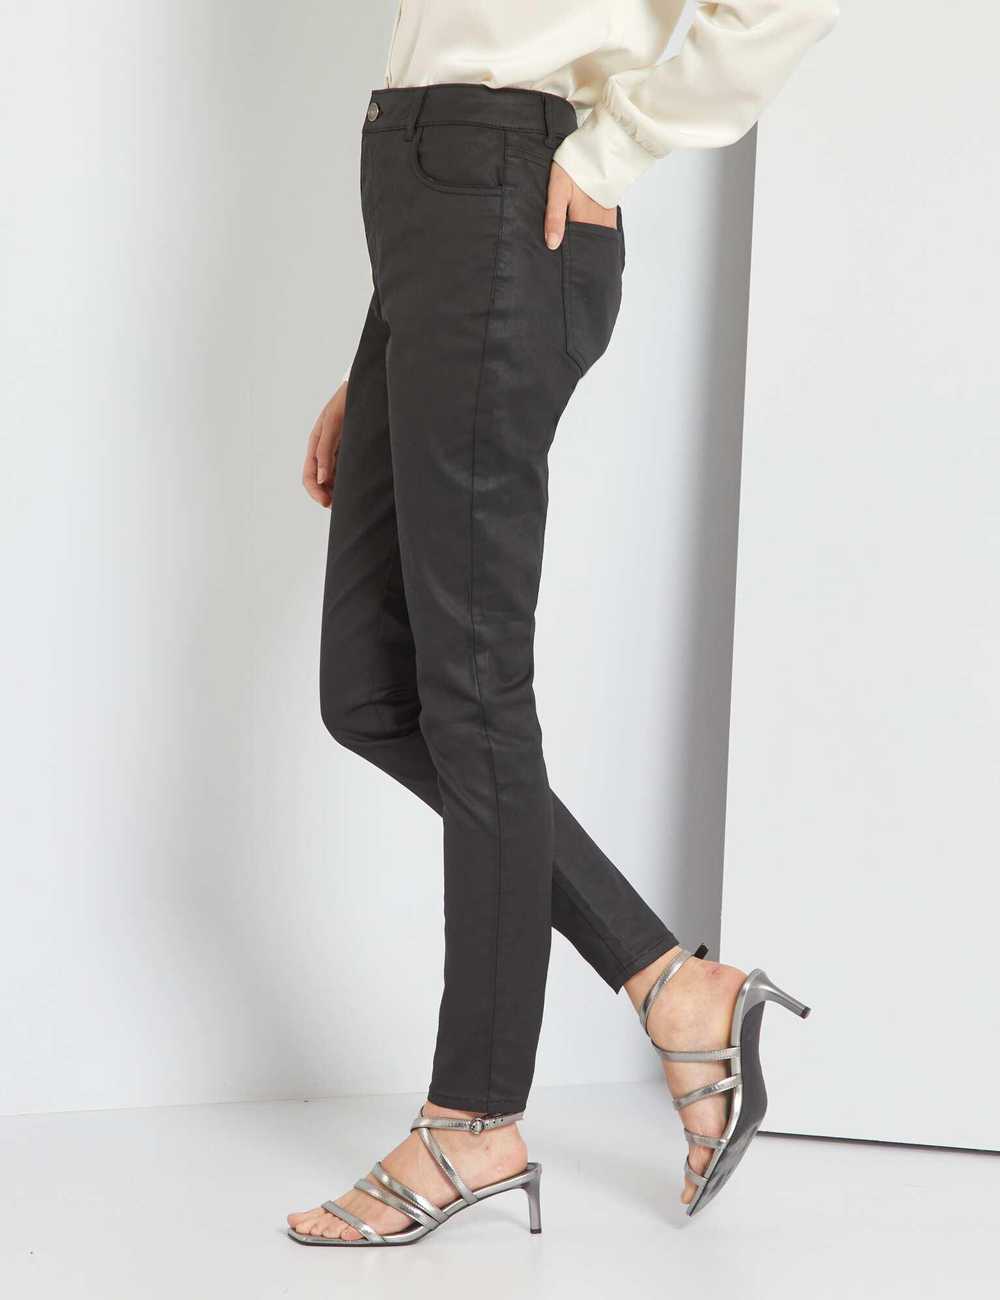 Black Coated Skinny Trousers | ONLY | SilkFred UAE